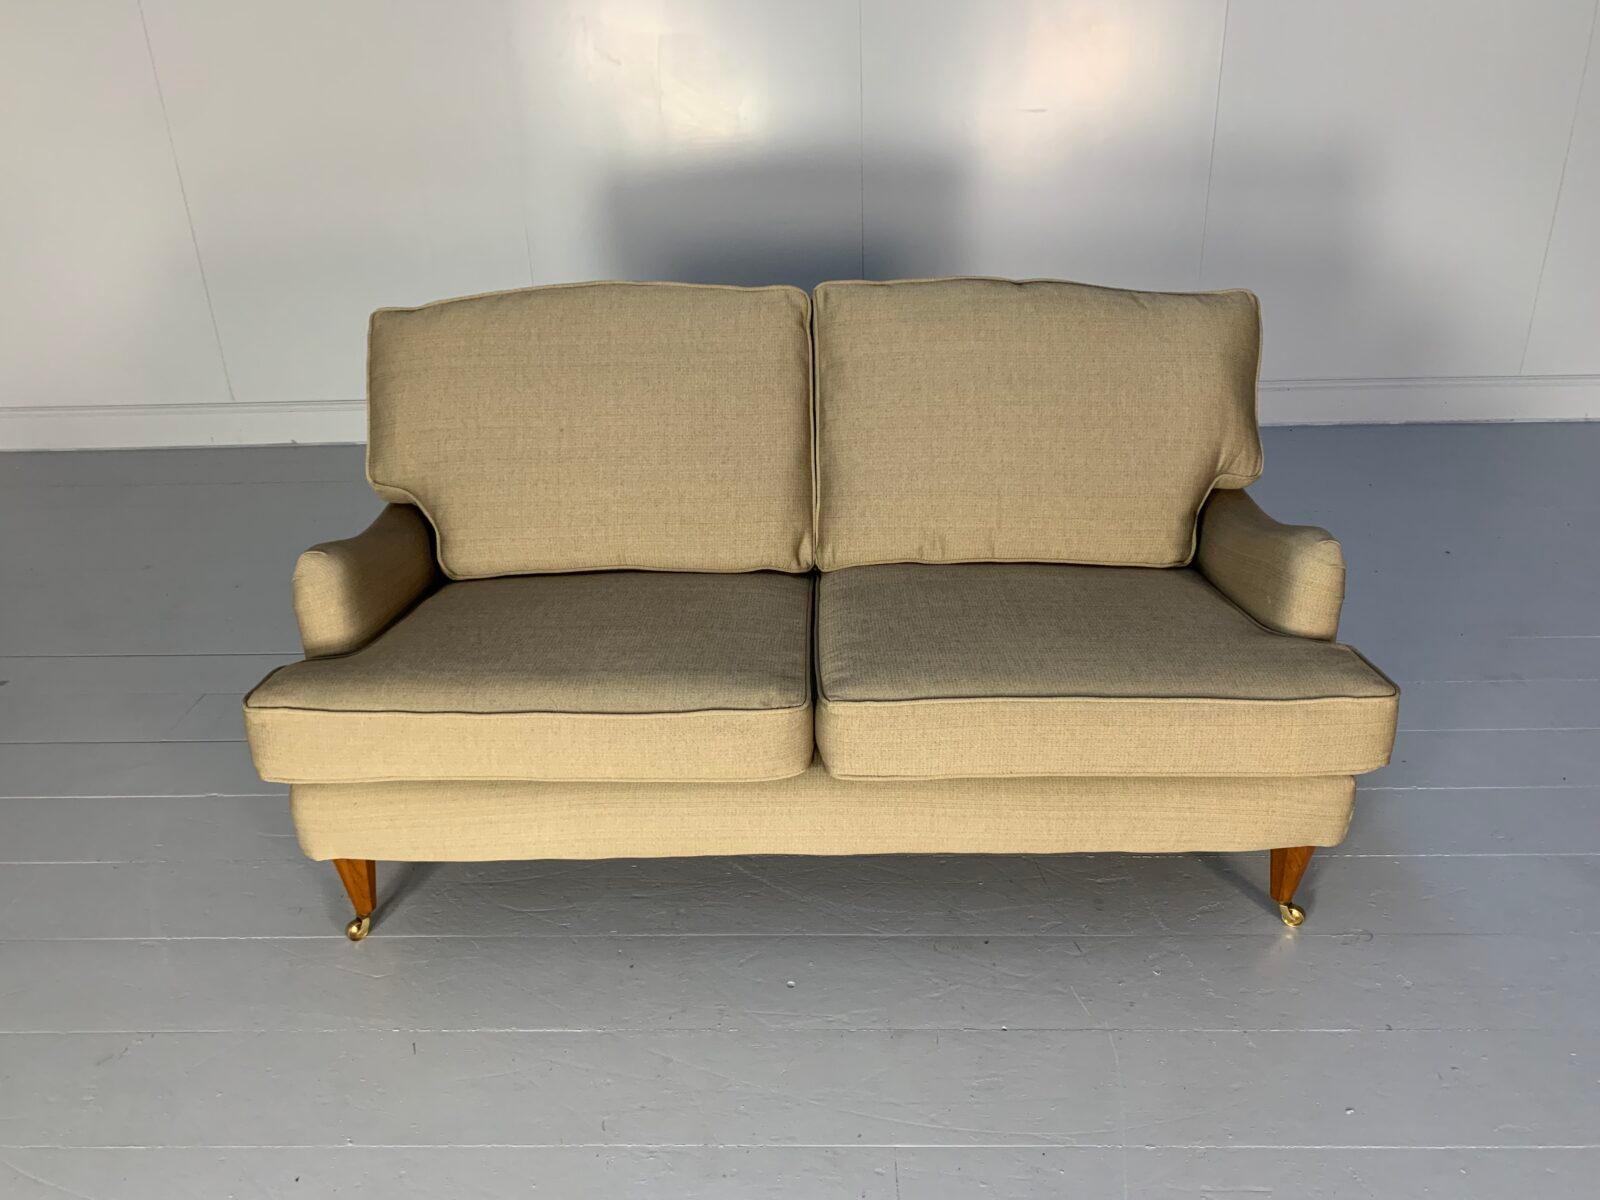 Linley 2.5-Seat Howard-Design Sofa - In Woven Gold Fabric In Good Condition For Sale In Barrowford, GB